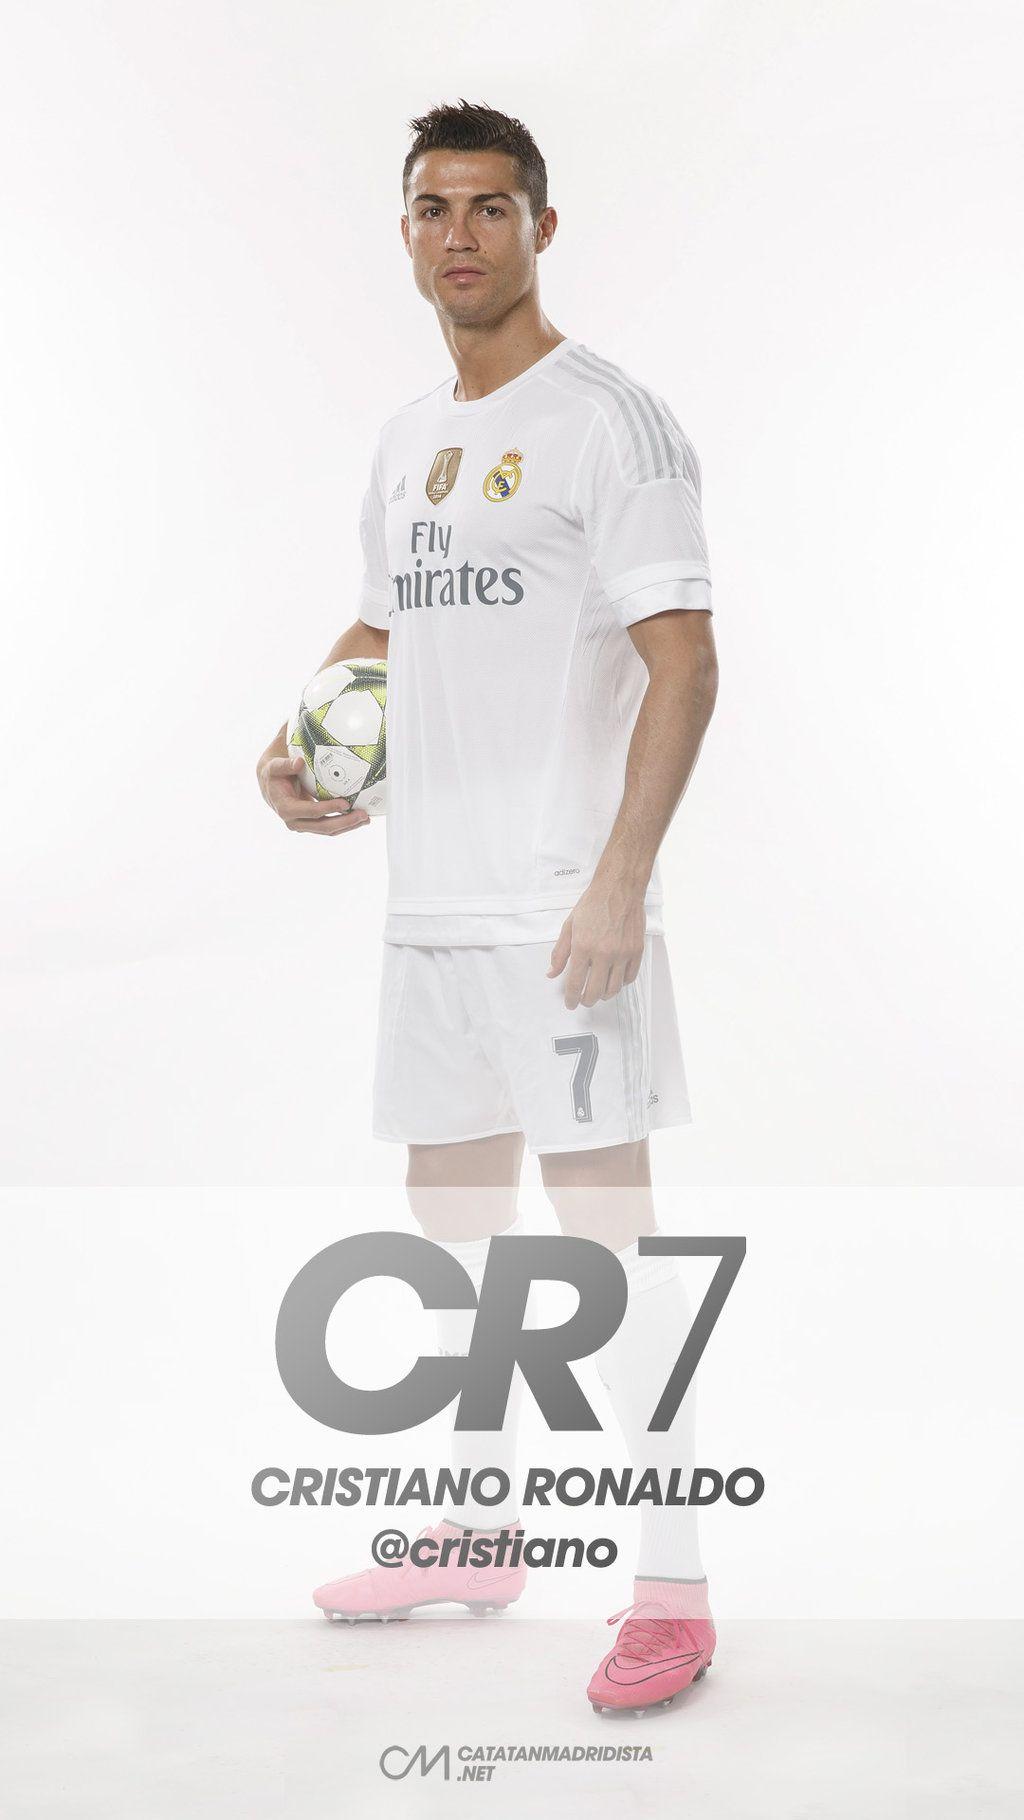 Cristiano Ronaldo Wallpaper for iPhone and Android